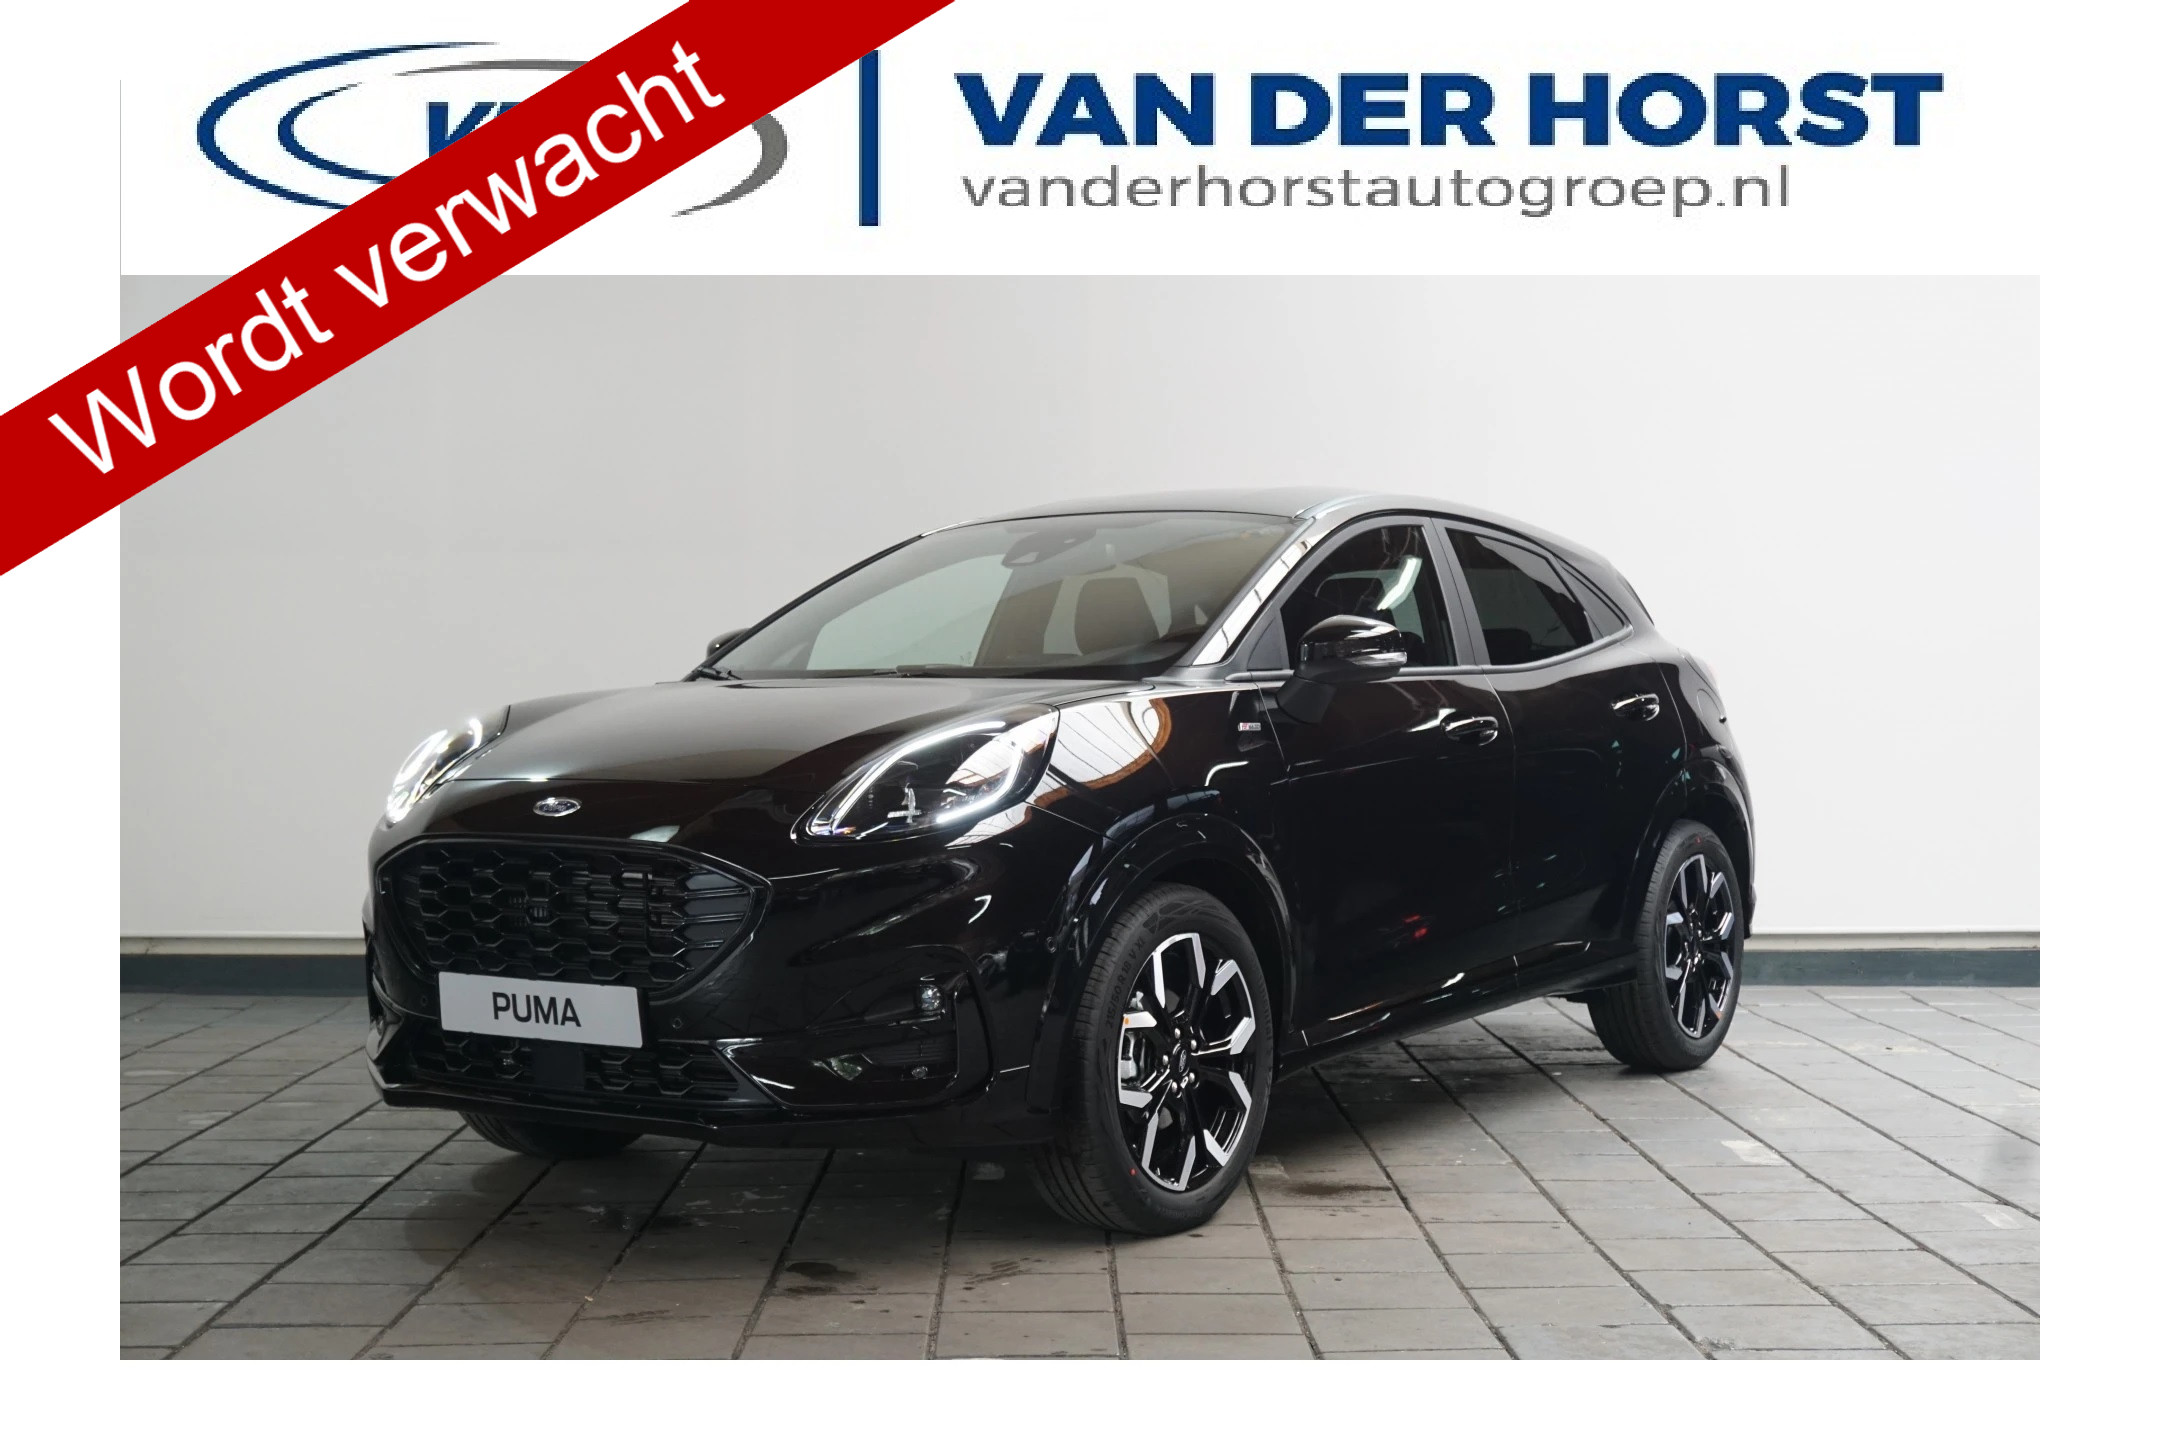 Ford Puma 1.0 125 pk EcoBoost Mild Hybrid ST-Line X Automaat Cruise Control, Climate Control, Achteruitrijcamera, PDC voor en achter